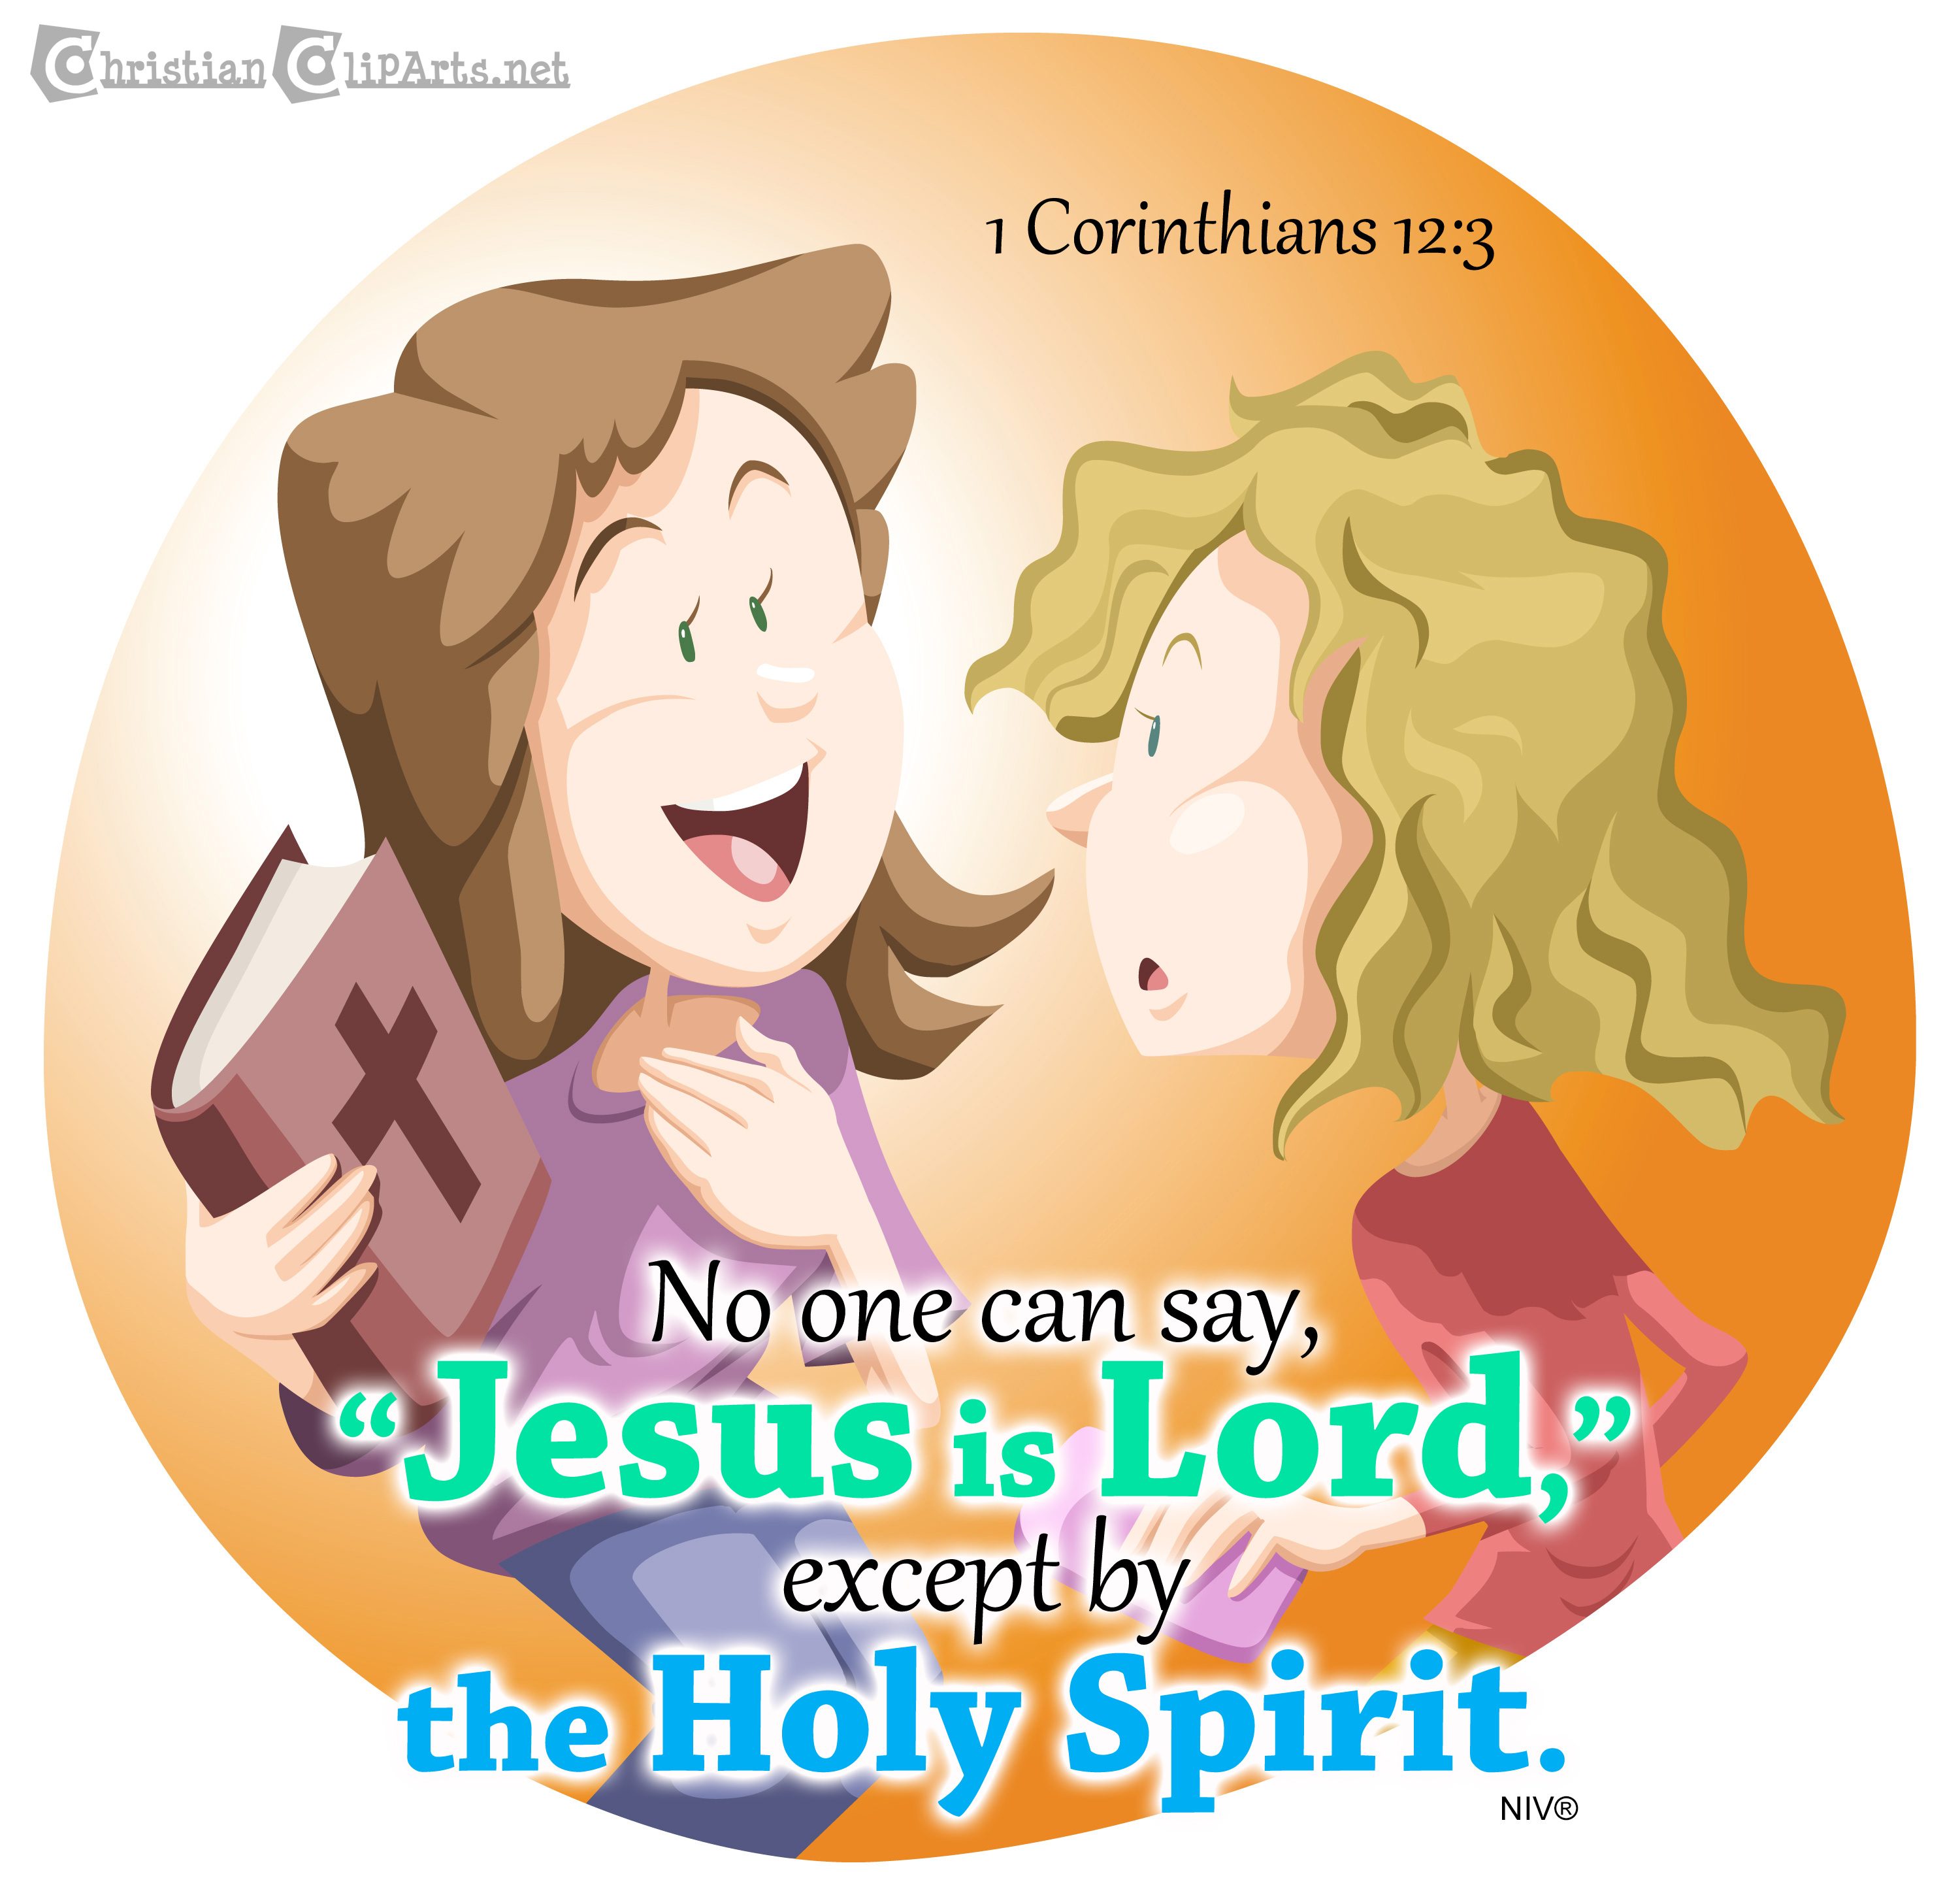 Only by Holy Spirit